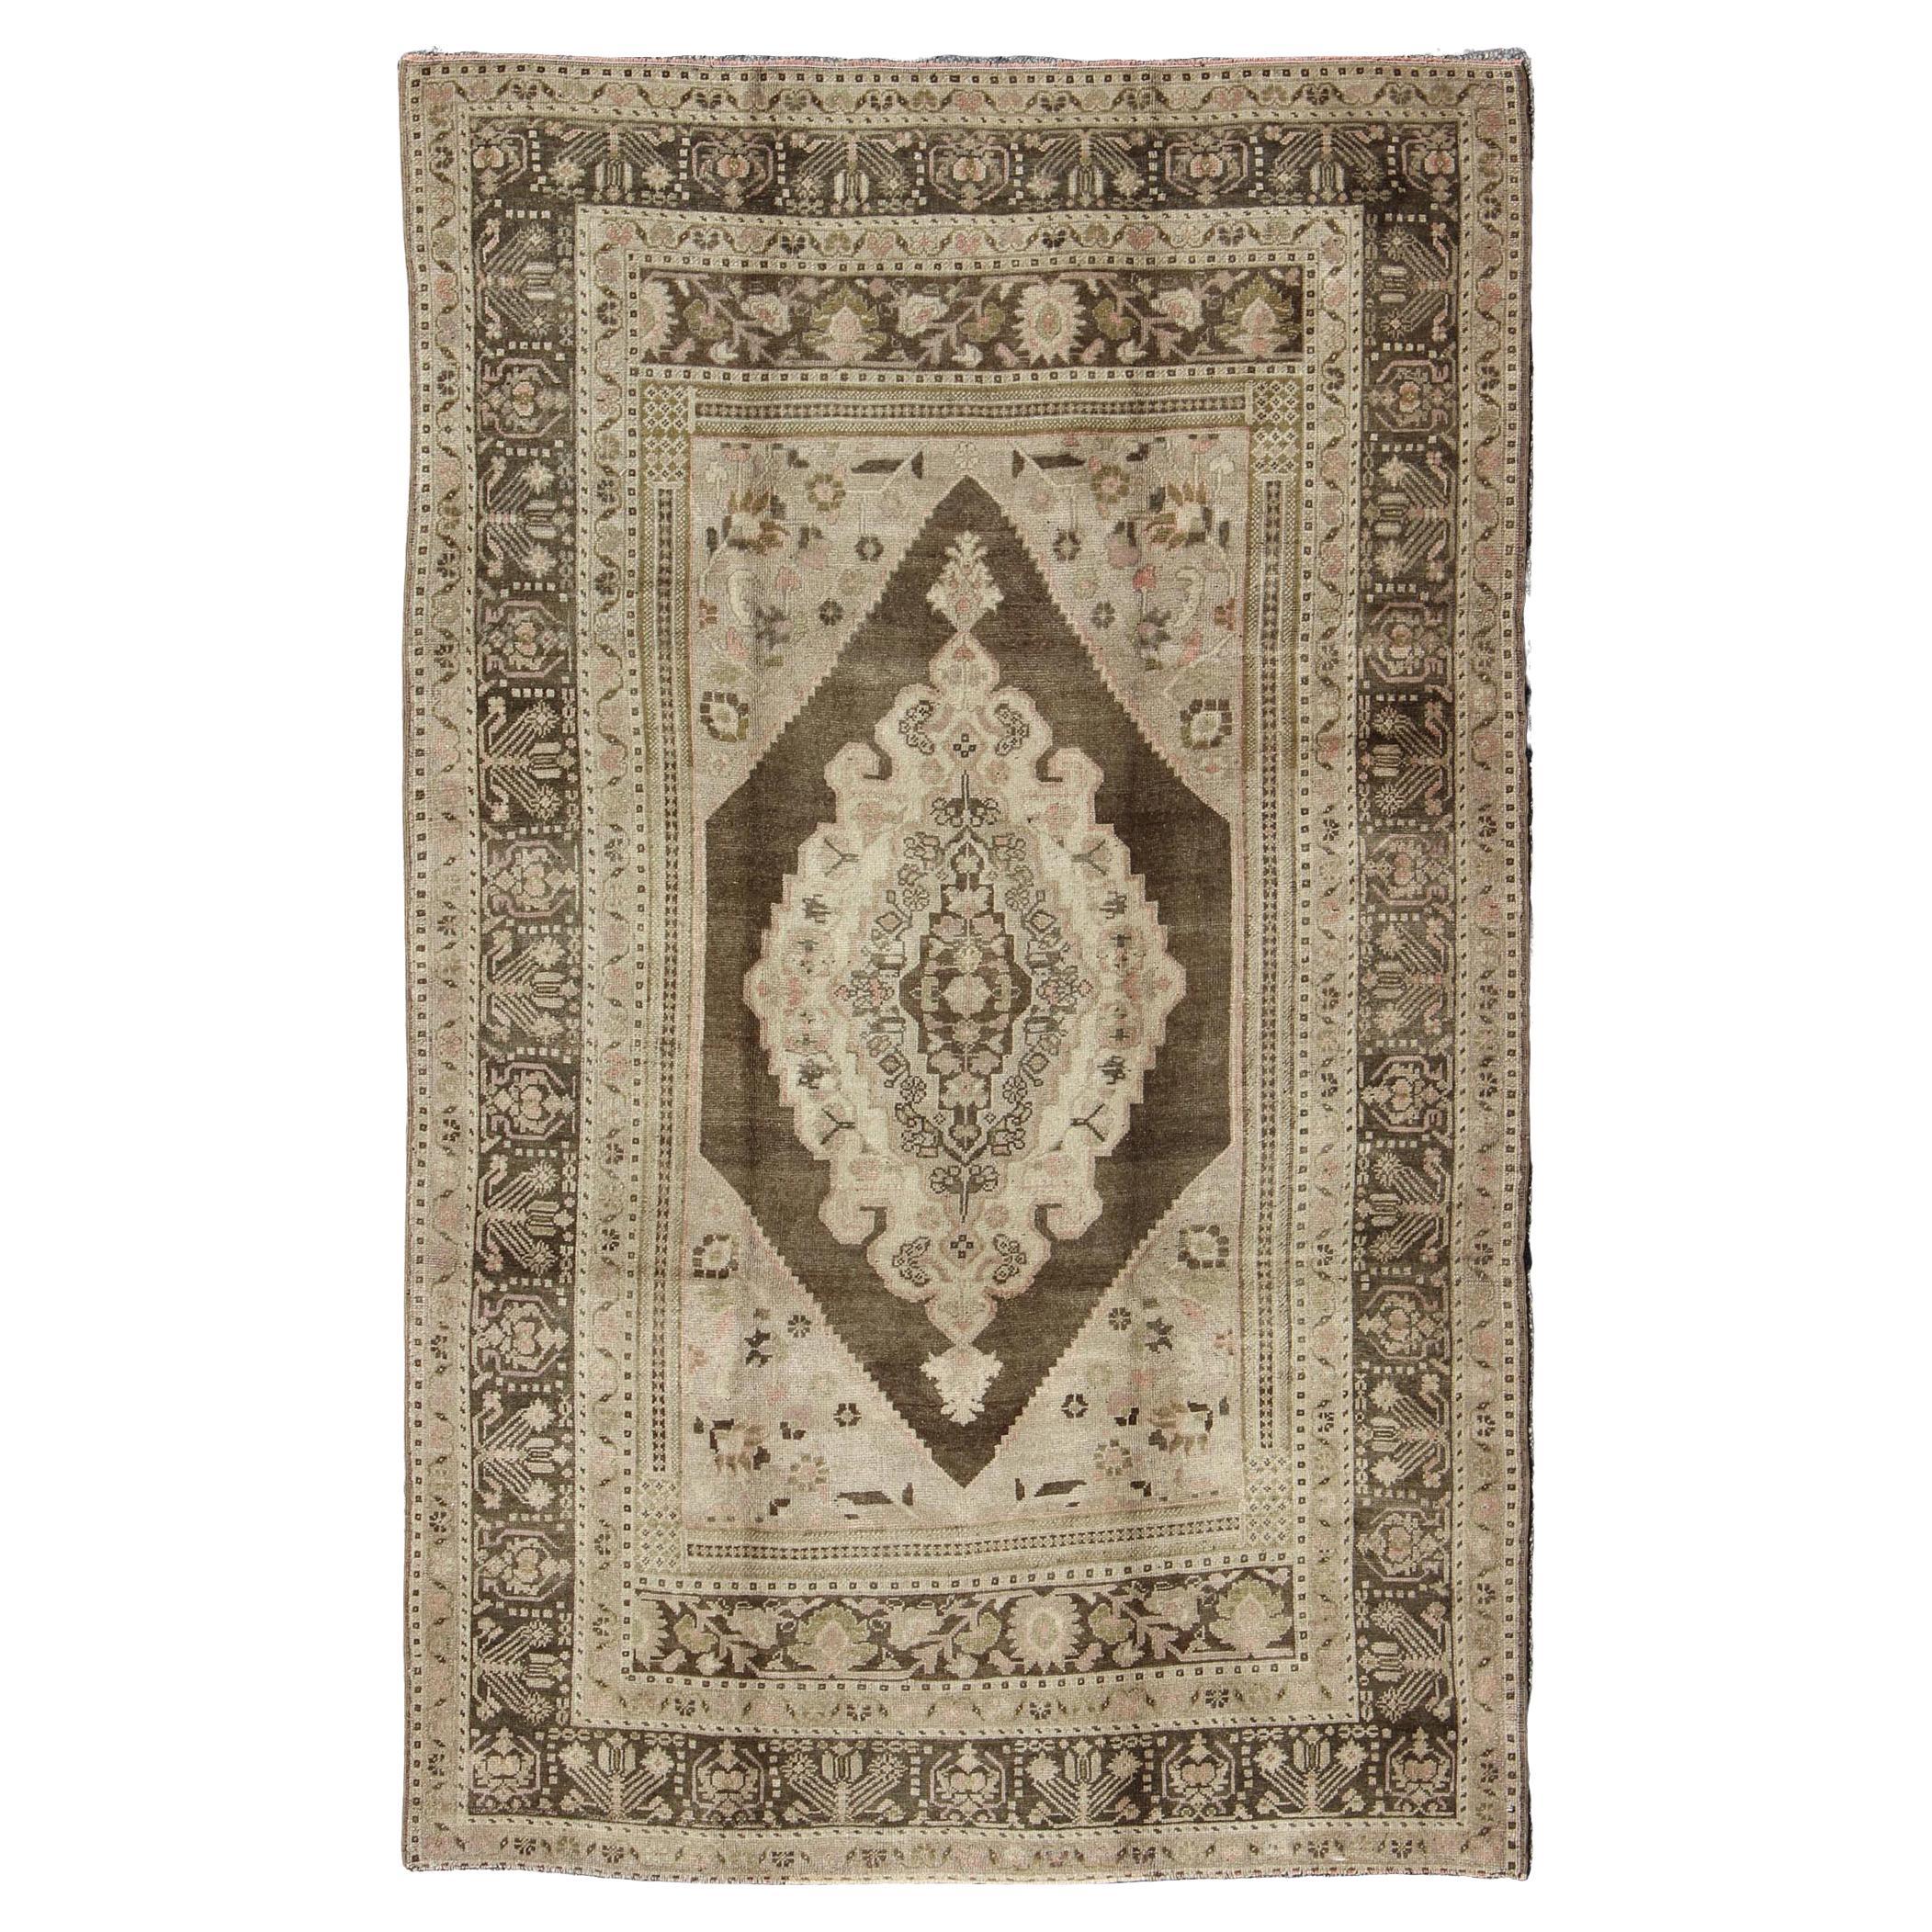 Vintage Stylized Medallion Turkish Oushak Area Rug in Neutral Beiges and Browns